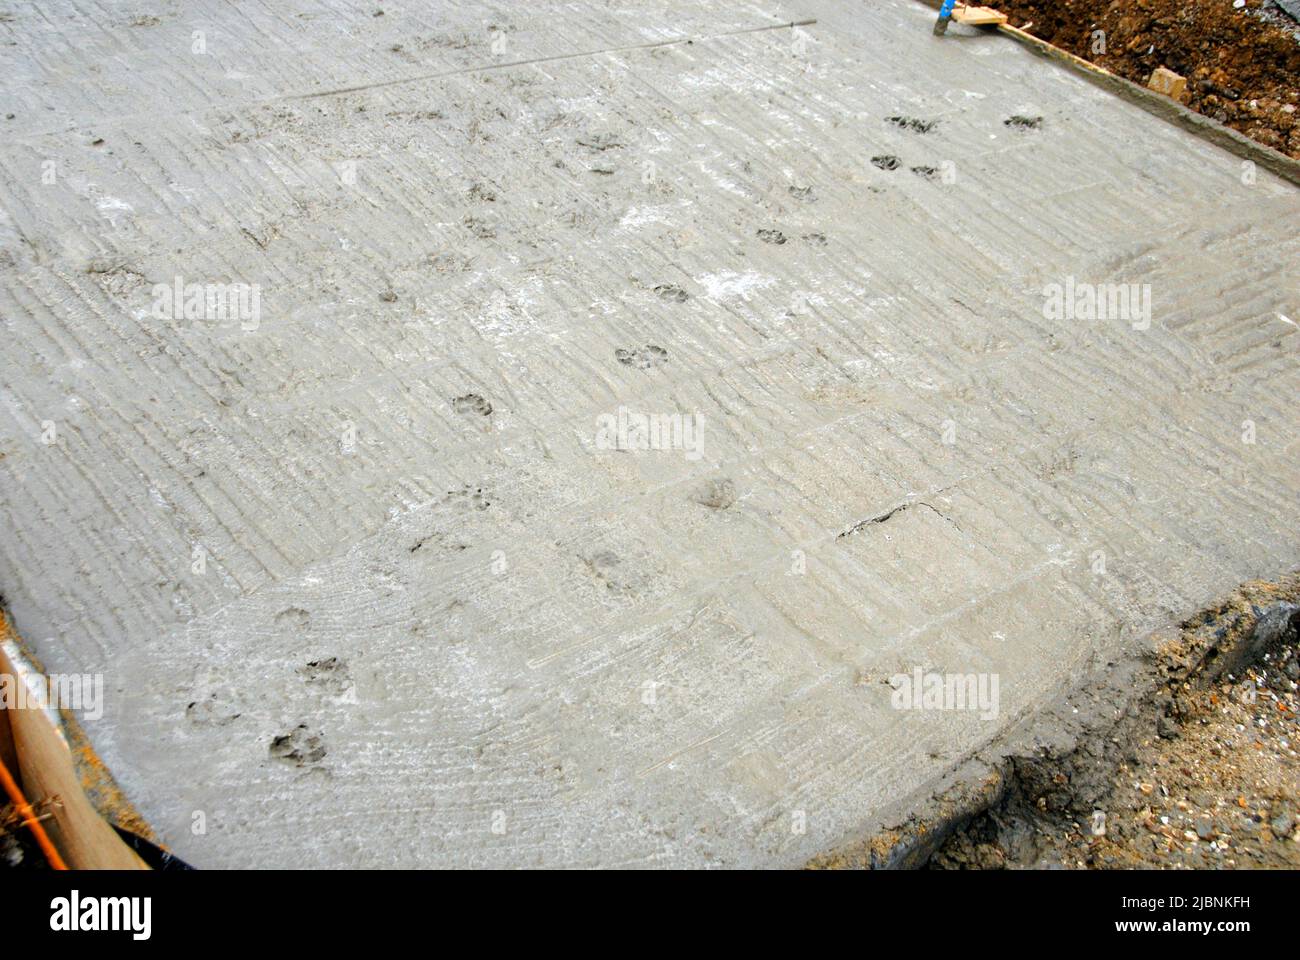 Freshly laid concrete on a building site left overnight with footprints left by a passing animal Stock Photo